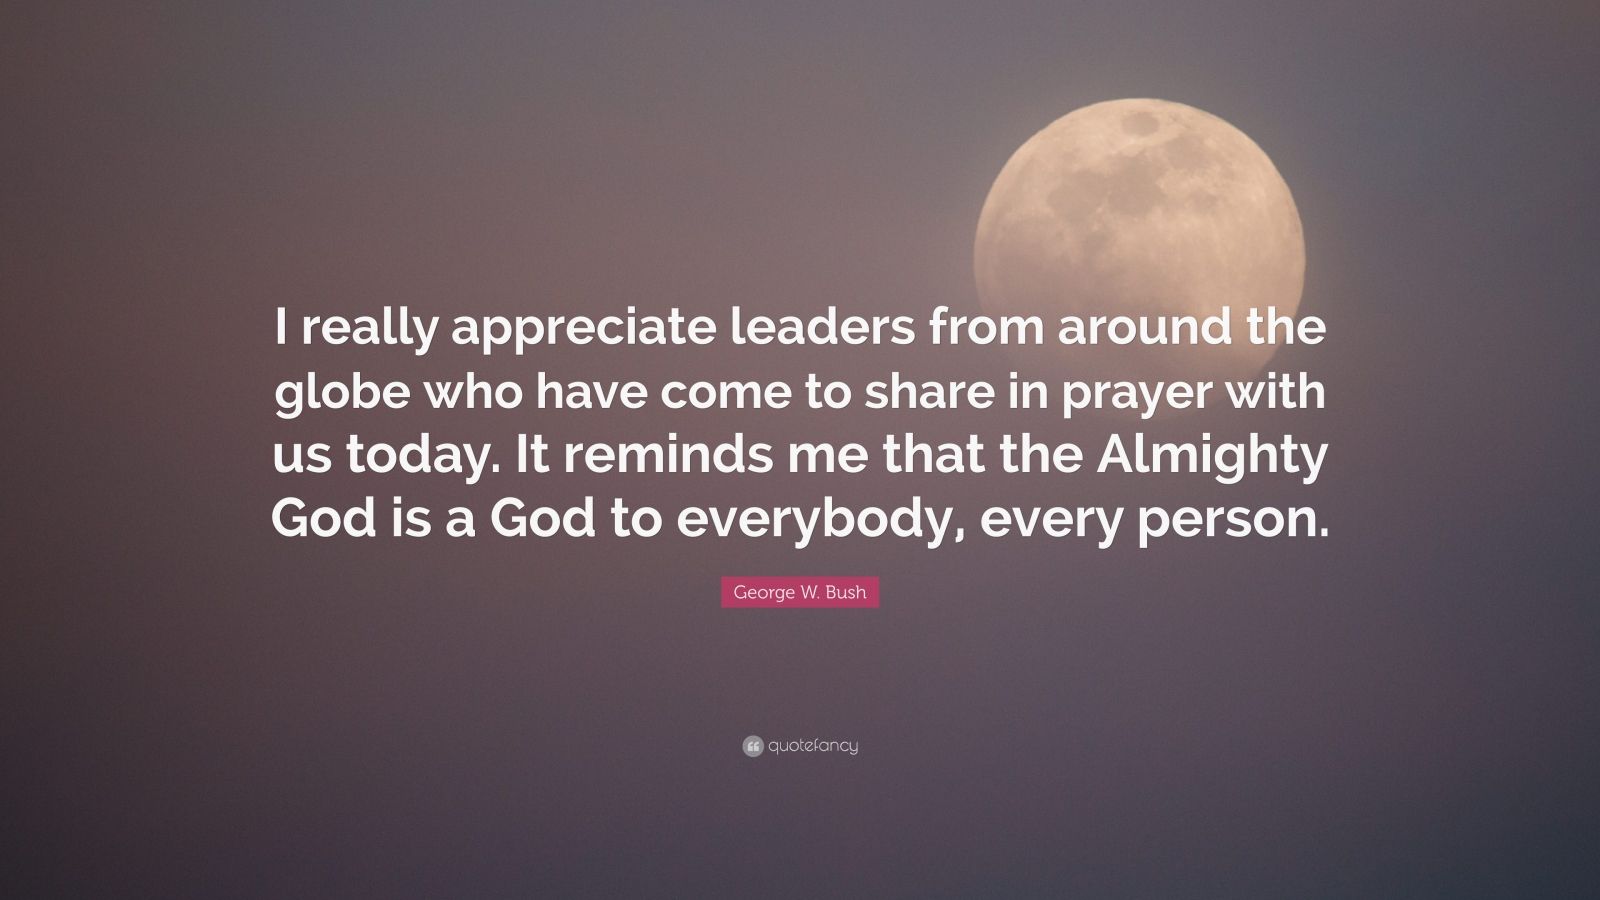 George W. Bush Quote: “I really appreciate leaders from around the